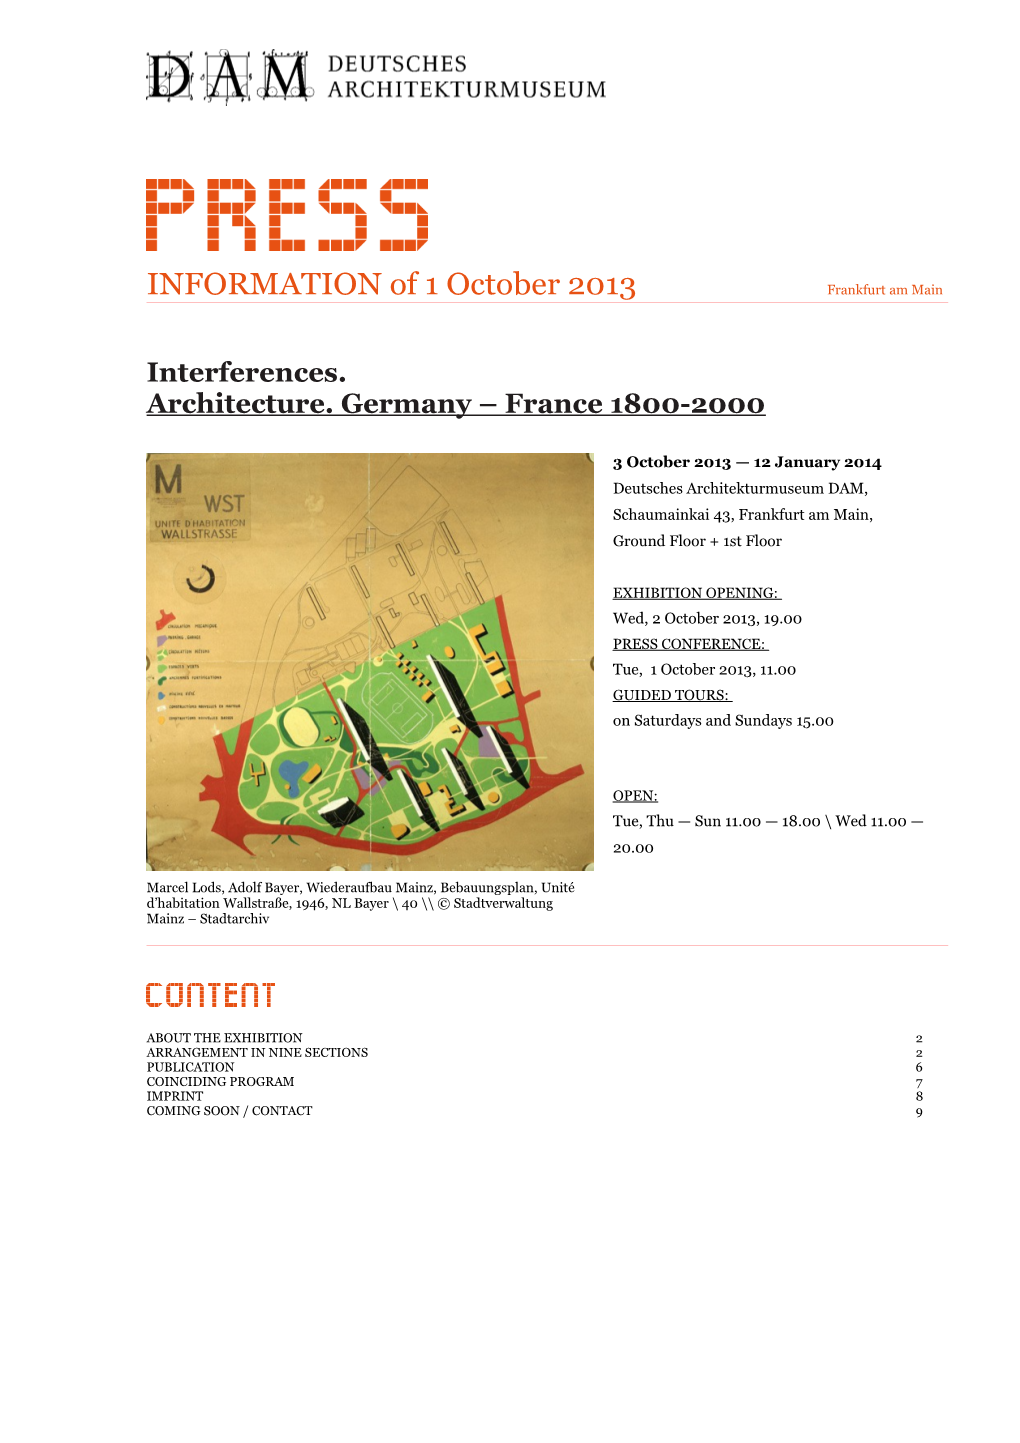 Interferences Shape Architecture in Germany and France